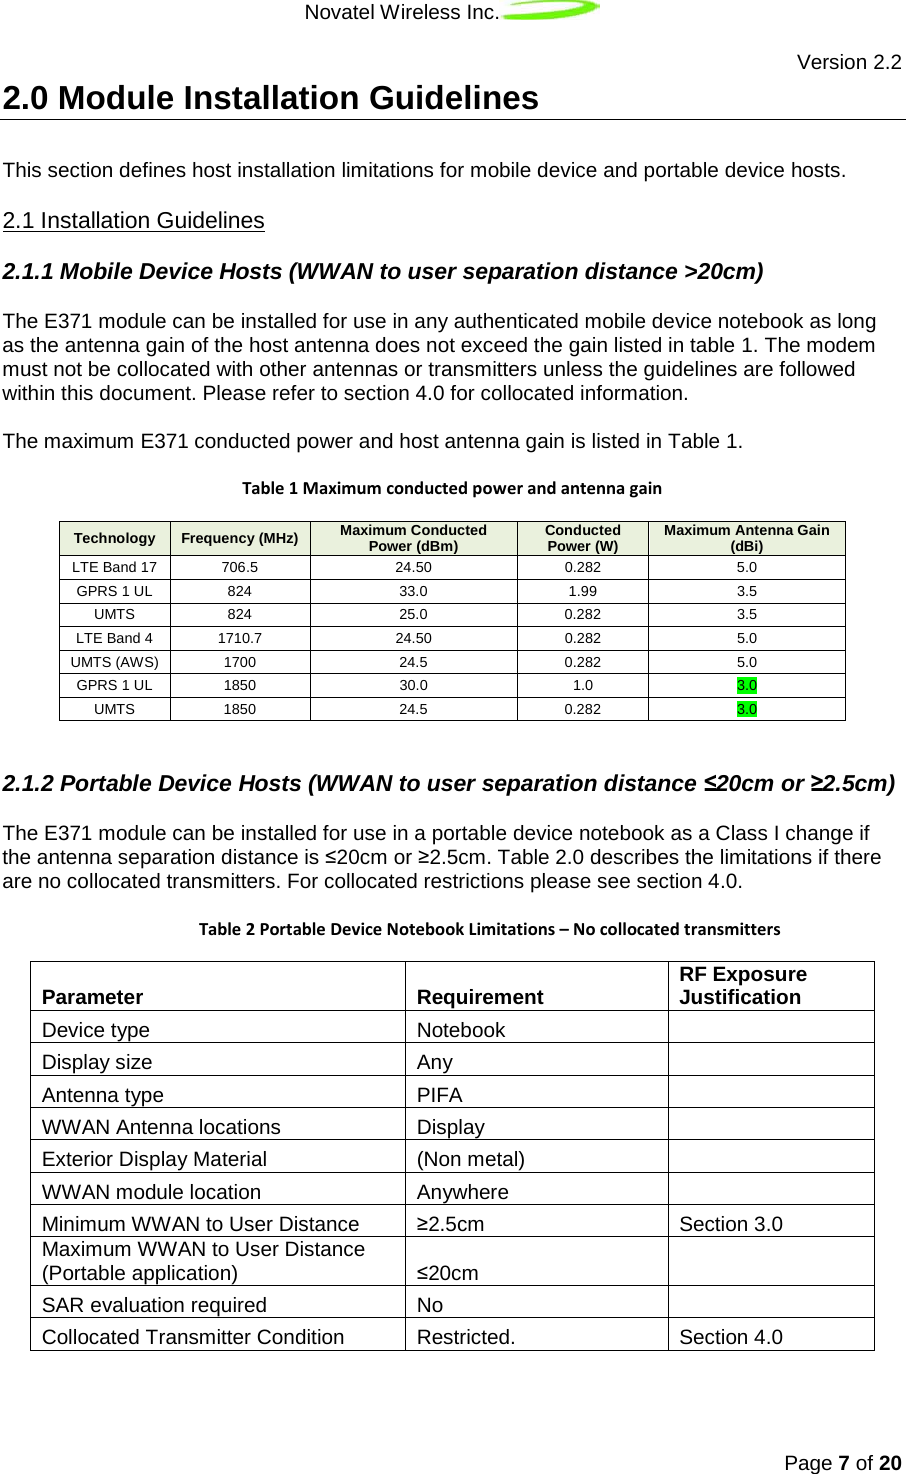 Novatel Wireless Inc.   Version 2.2 Page 7 of 20  2.0 Module Installation Guidelines This section defines host installation limitations for mobile device and portable device hosts. 2.1.1 Mobile Device Hosts (WWAN to user separation distance &gt;20cm) 2.1 Installation Guidelines The E371 module can be installed for use in any authenticated mobile device notebook as long as the antenna gain of the host antenna does not exceed the gain listed in table 1. The modem must not be collocated with other antennas or transmitters unless the guidelines are followed within this document. Please refer to section 4.0 for collocated information.  The maximum E371 conducted power and host antenna gain is listed in Table 1.   Table 1 Maximum conducted power and antenna gain Technology Frequency (MHz) Maximum Conducted Power (dBm) Conducted Power (W) Maximum Antenna Gain (dBi) LTE Band 17 706.5 24.50 0.282 5.0 GPRS 1 UL 824 33.0 1.99 3.5 UMTS 824  25.0 0.282 3.5 LTE Band 4 1710.7 24.50 0.282 5.0 UMTS (AWS) 1700 24.5 0.282 5.0 GPRS 1 UL 1850 30.0 1.0 3.0 UMTS 1850 24.5 0.282 3.0  2.1.2 Portable Device Hosts (WWAN to user separation distance ≤20cm or ≥2.5cm) The E371 module can be installed for use in a portable device notebook as a Class I change if the antenna separation distance is ≤20cm or ≥2.5cm. Table 2.0 describes the limitations if there are no collocated transmitters. For collocated restrictions please see section 4.0.    Table 2 Portable Device Notebook Limitations – No collocated transmitters Parameter Requirement RF Exposure Justification Device type Notebook  Display size Any  Antenna type PIFA  WWAN Antenna locations Display  Exterior Display Material (Non metal)  WWAN module location Anywhere  Minimum WWAN to User Distance ≥2.5cm Section 3.0 Maximum WWAN to User Distance (Portable application) ≤20cm  SAR evaluation required No  Collocated Transmitter Condition Restricted. Section 4.0     